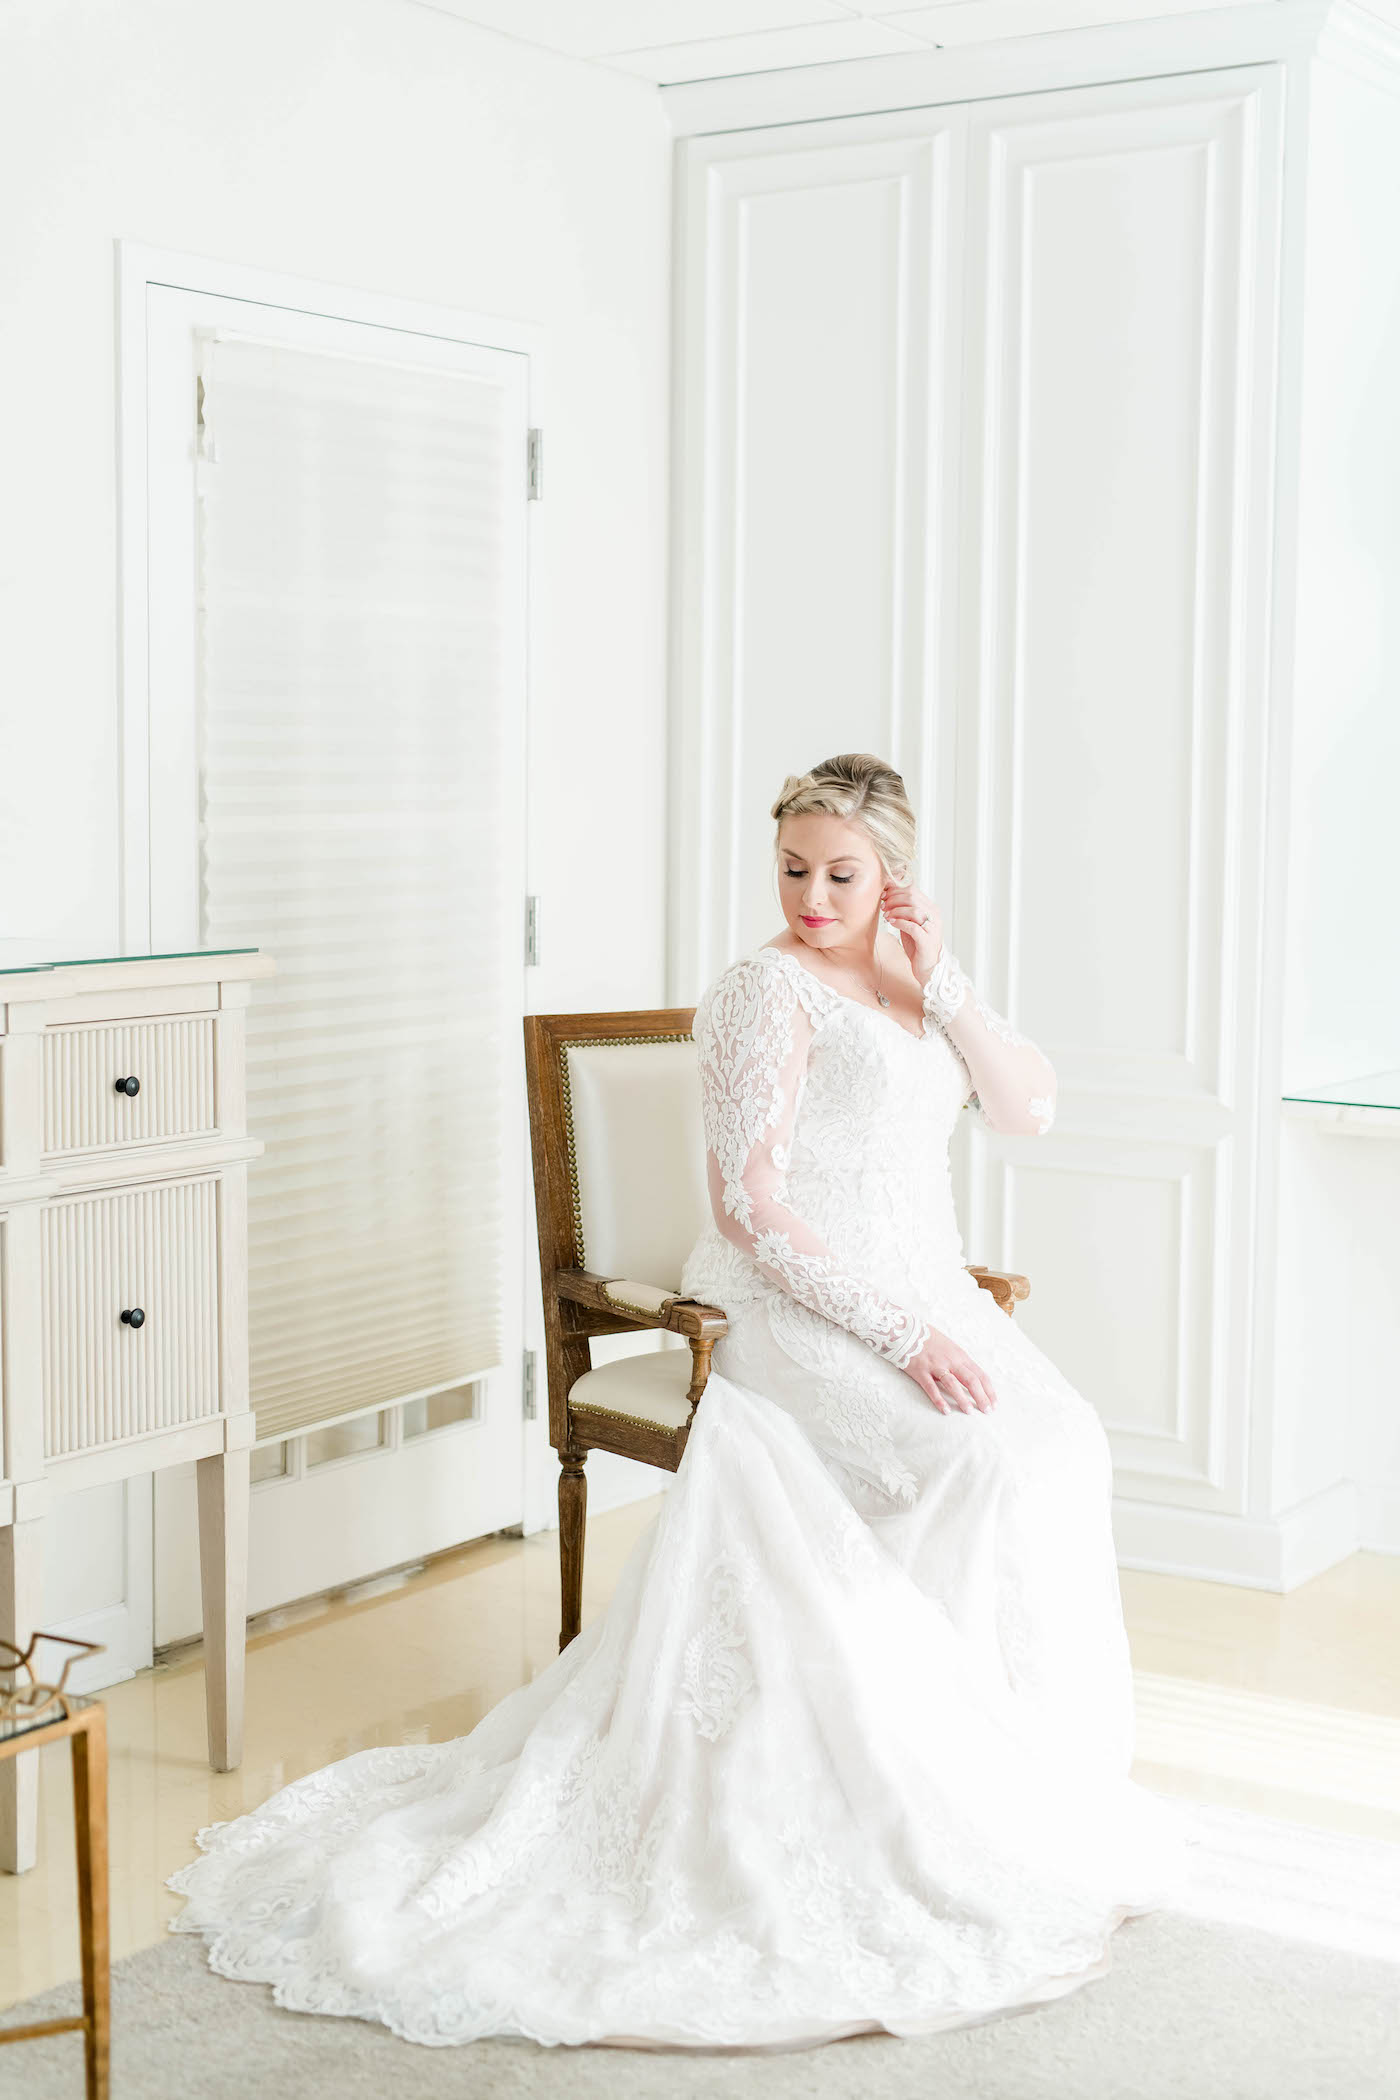 Bridal Portrait at Tampa Wedding Venue The Tampa Garden Club | Ivory Lace Long Sleeve Bridal Gown With V Neck | Side Braid Bridal Hairstyle | Femme Akoi Beauty Studio